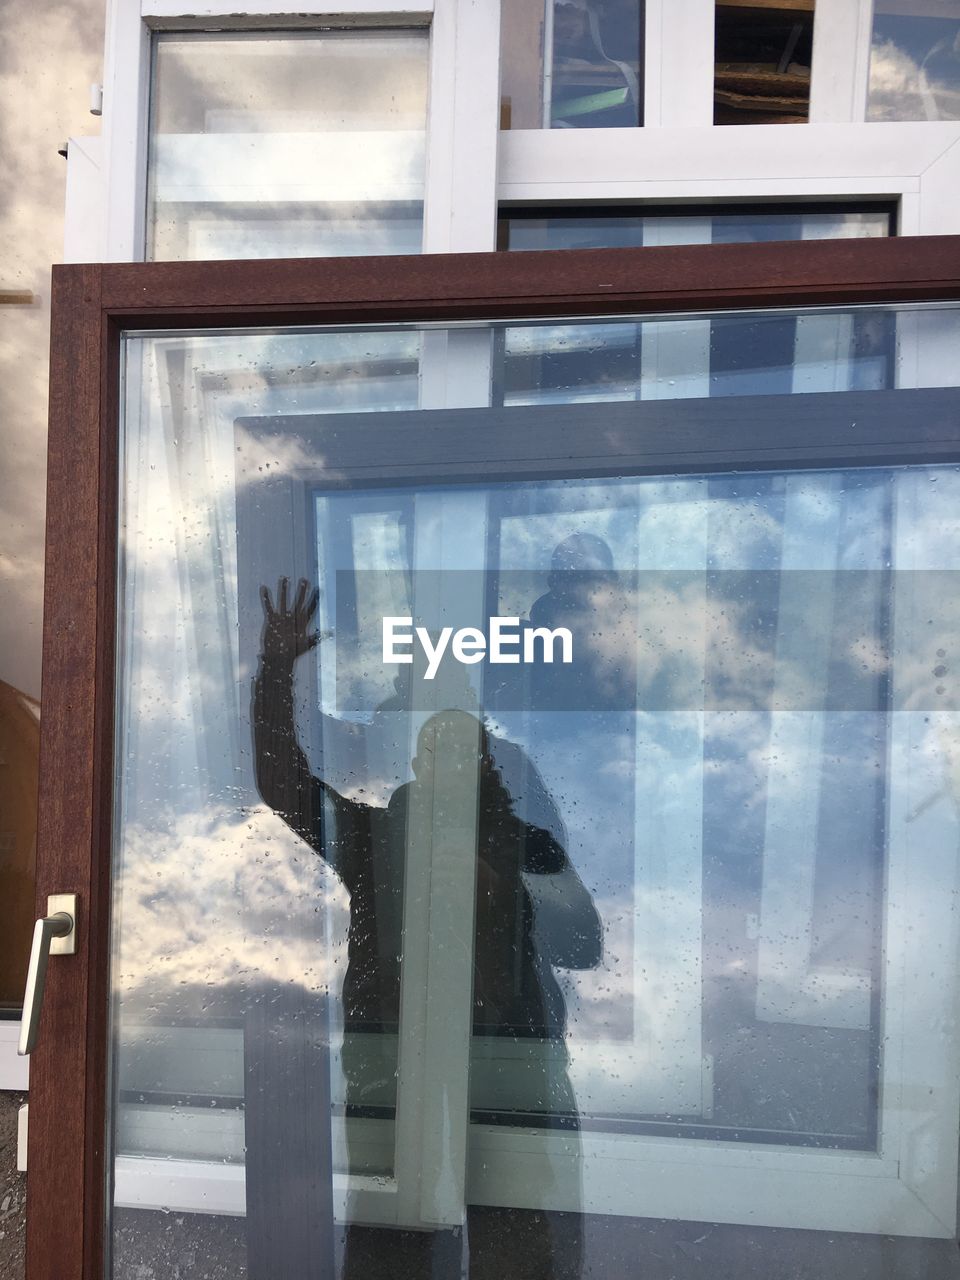 Man with hand raised reflecting on wet glass